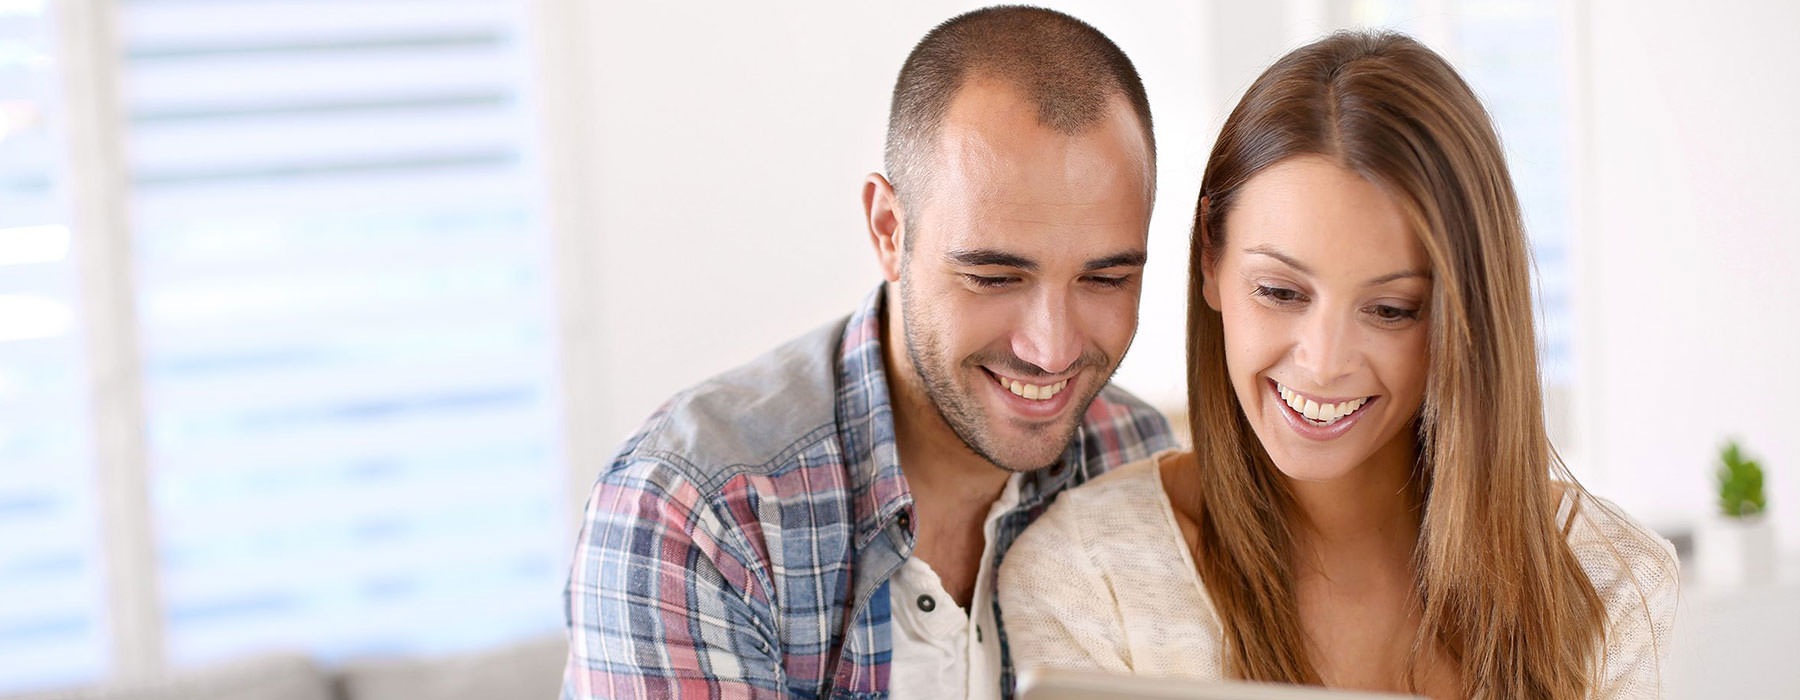 lifestyle image of a couple looking at a smart tablet together